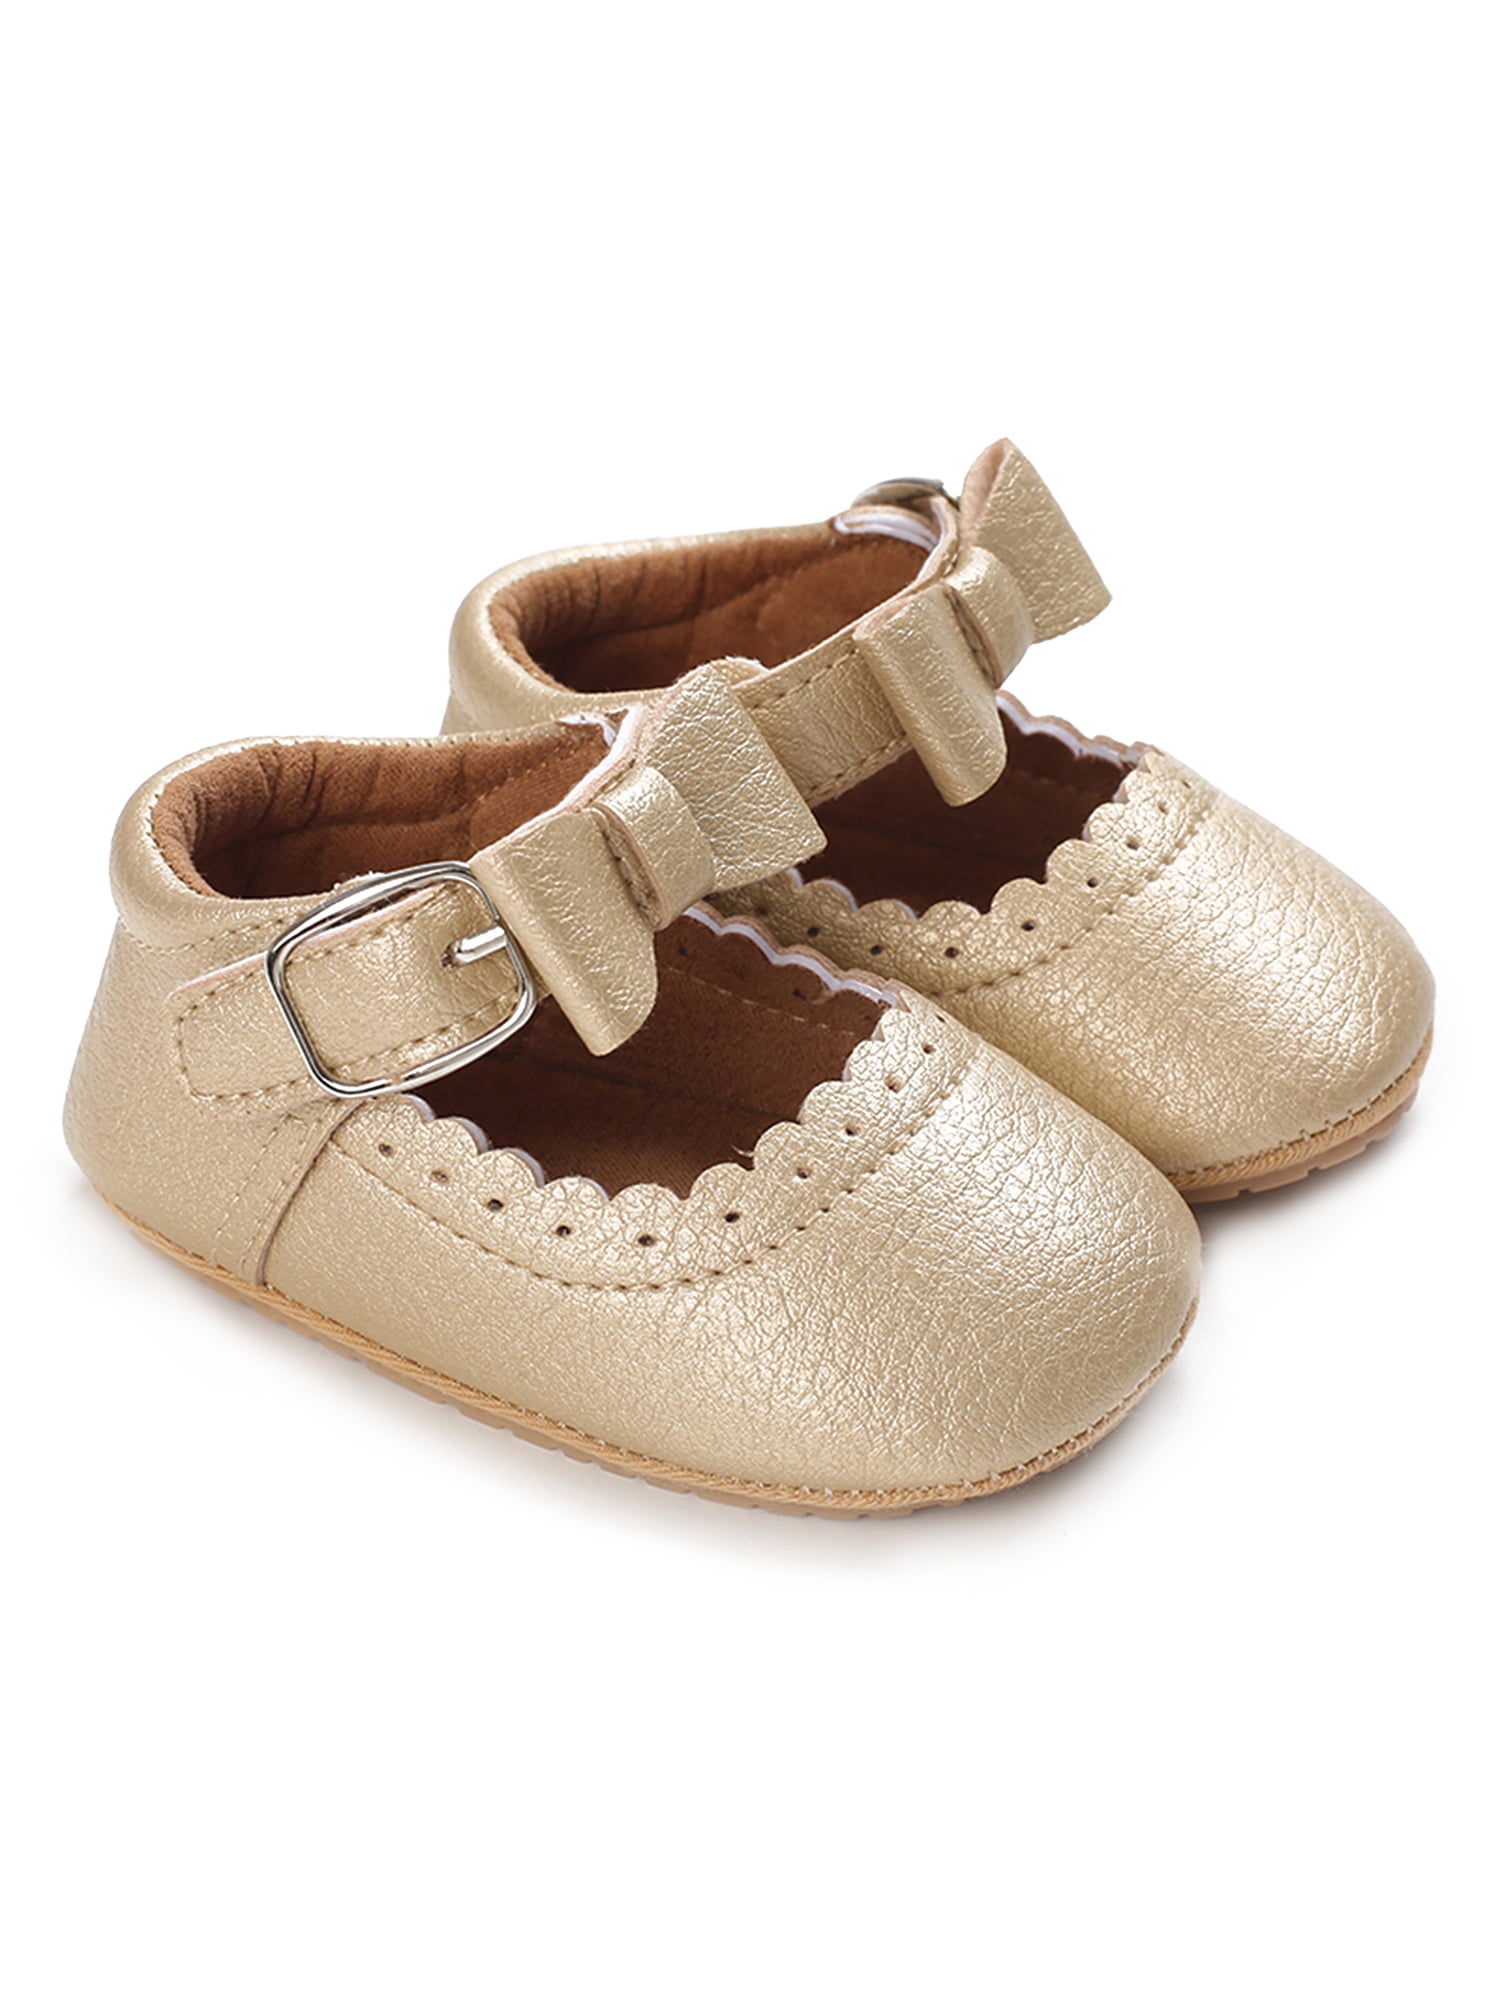 Mejale Baby Shoes Soft Sole Leather Moccasins Toddler First Walker Slippers with Sweet Bow